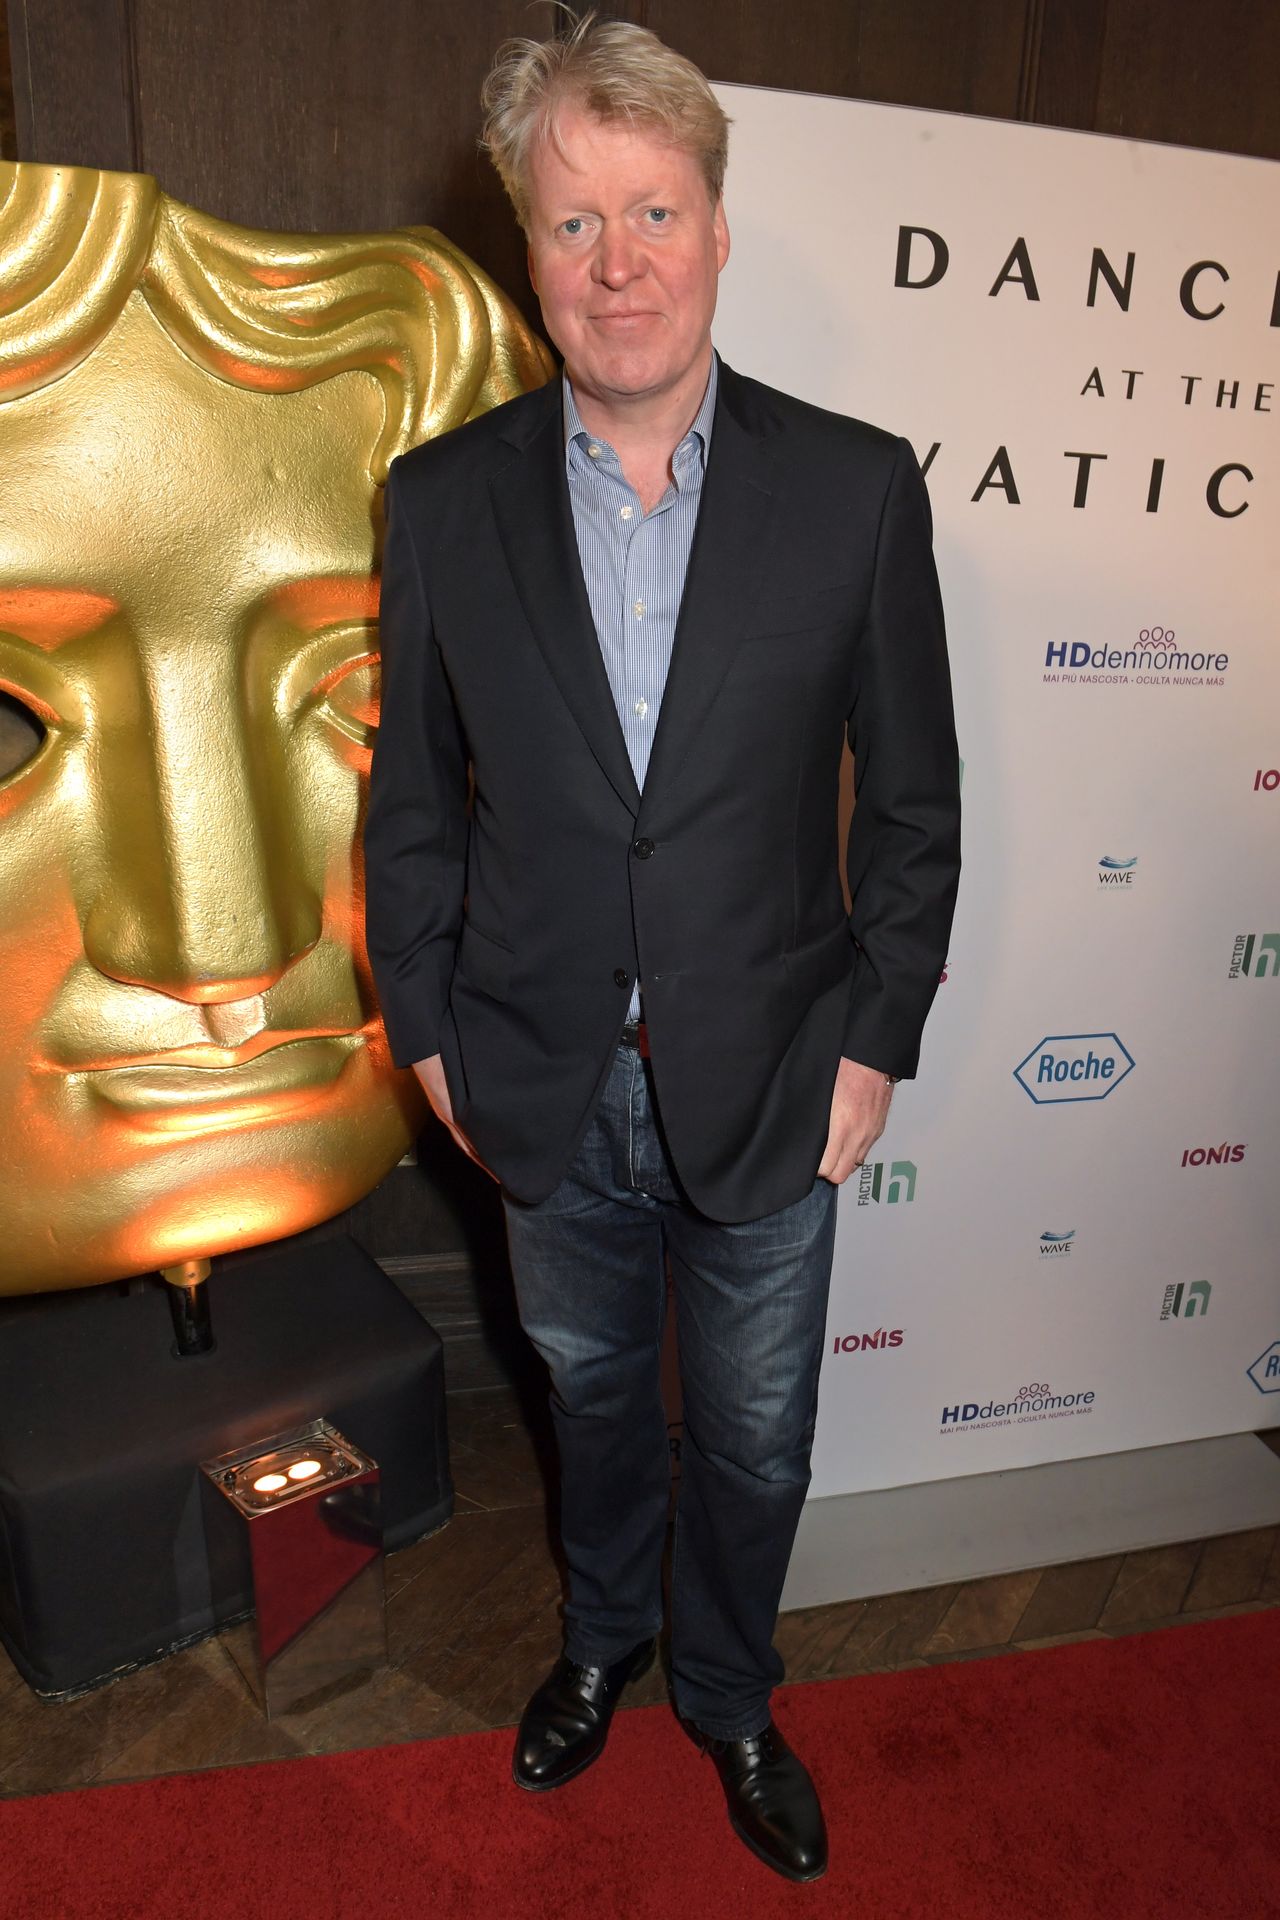 The UK Premiere Of "Dancing At The Vatican" Hosted By HDdennmore
LONDON, ENGLAND - FEBRUARY 05:  Charles Spencer, 9th Earl Spencer, attends the UK premiere of "Dancing At The Vatican" hosted by HDdennmore at BAFTA on February 5, 2020 in London, England.  (Photo by David M. Benett/Dave Benett/Getty Images for Charles Sabine)
Dave Benett